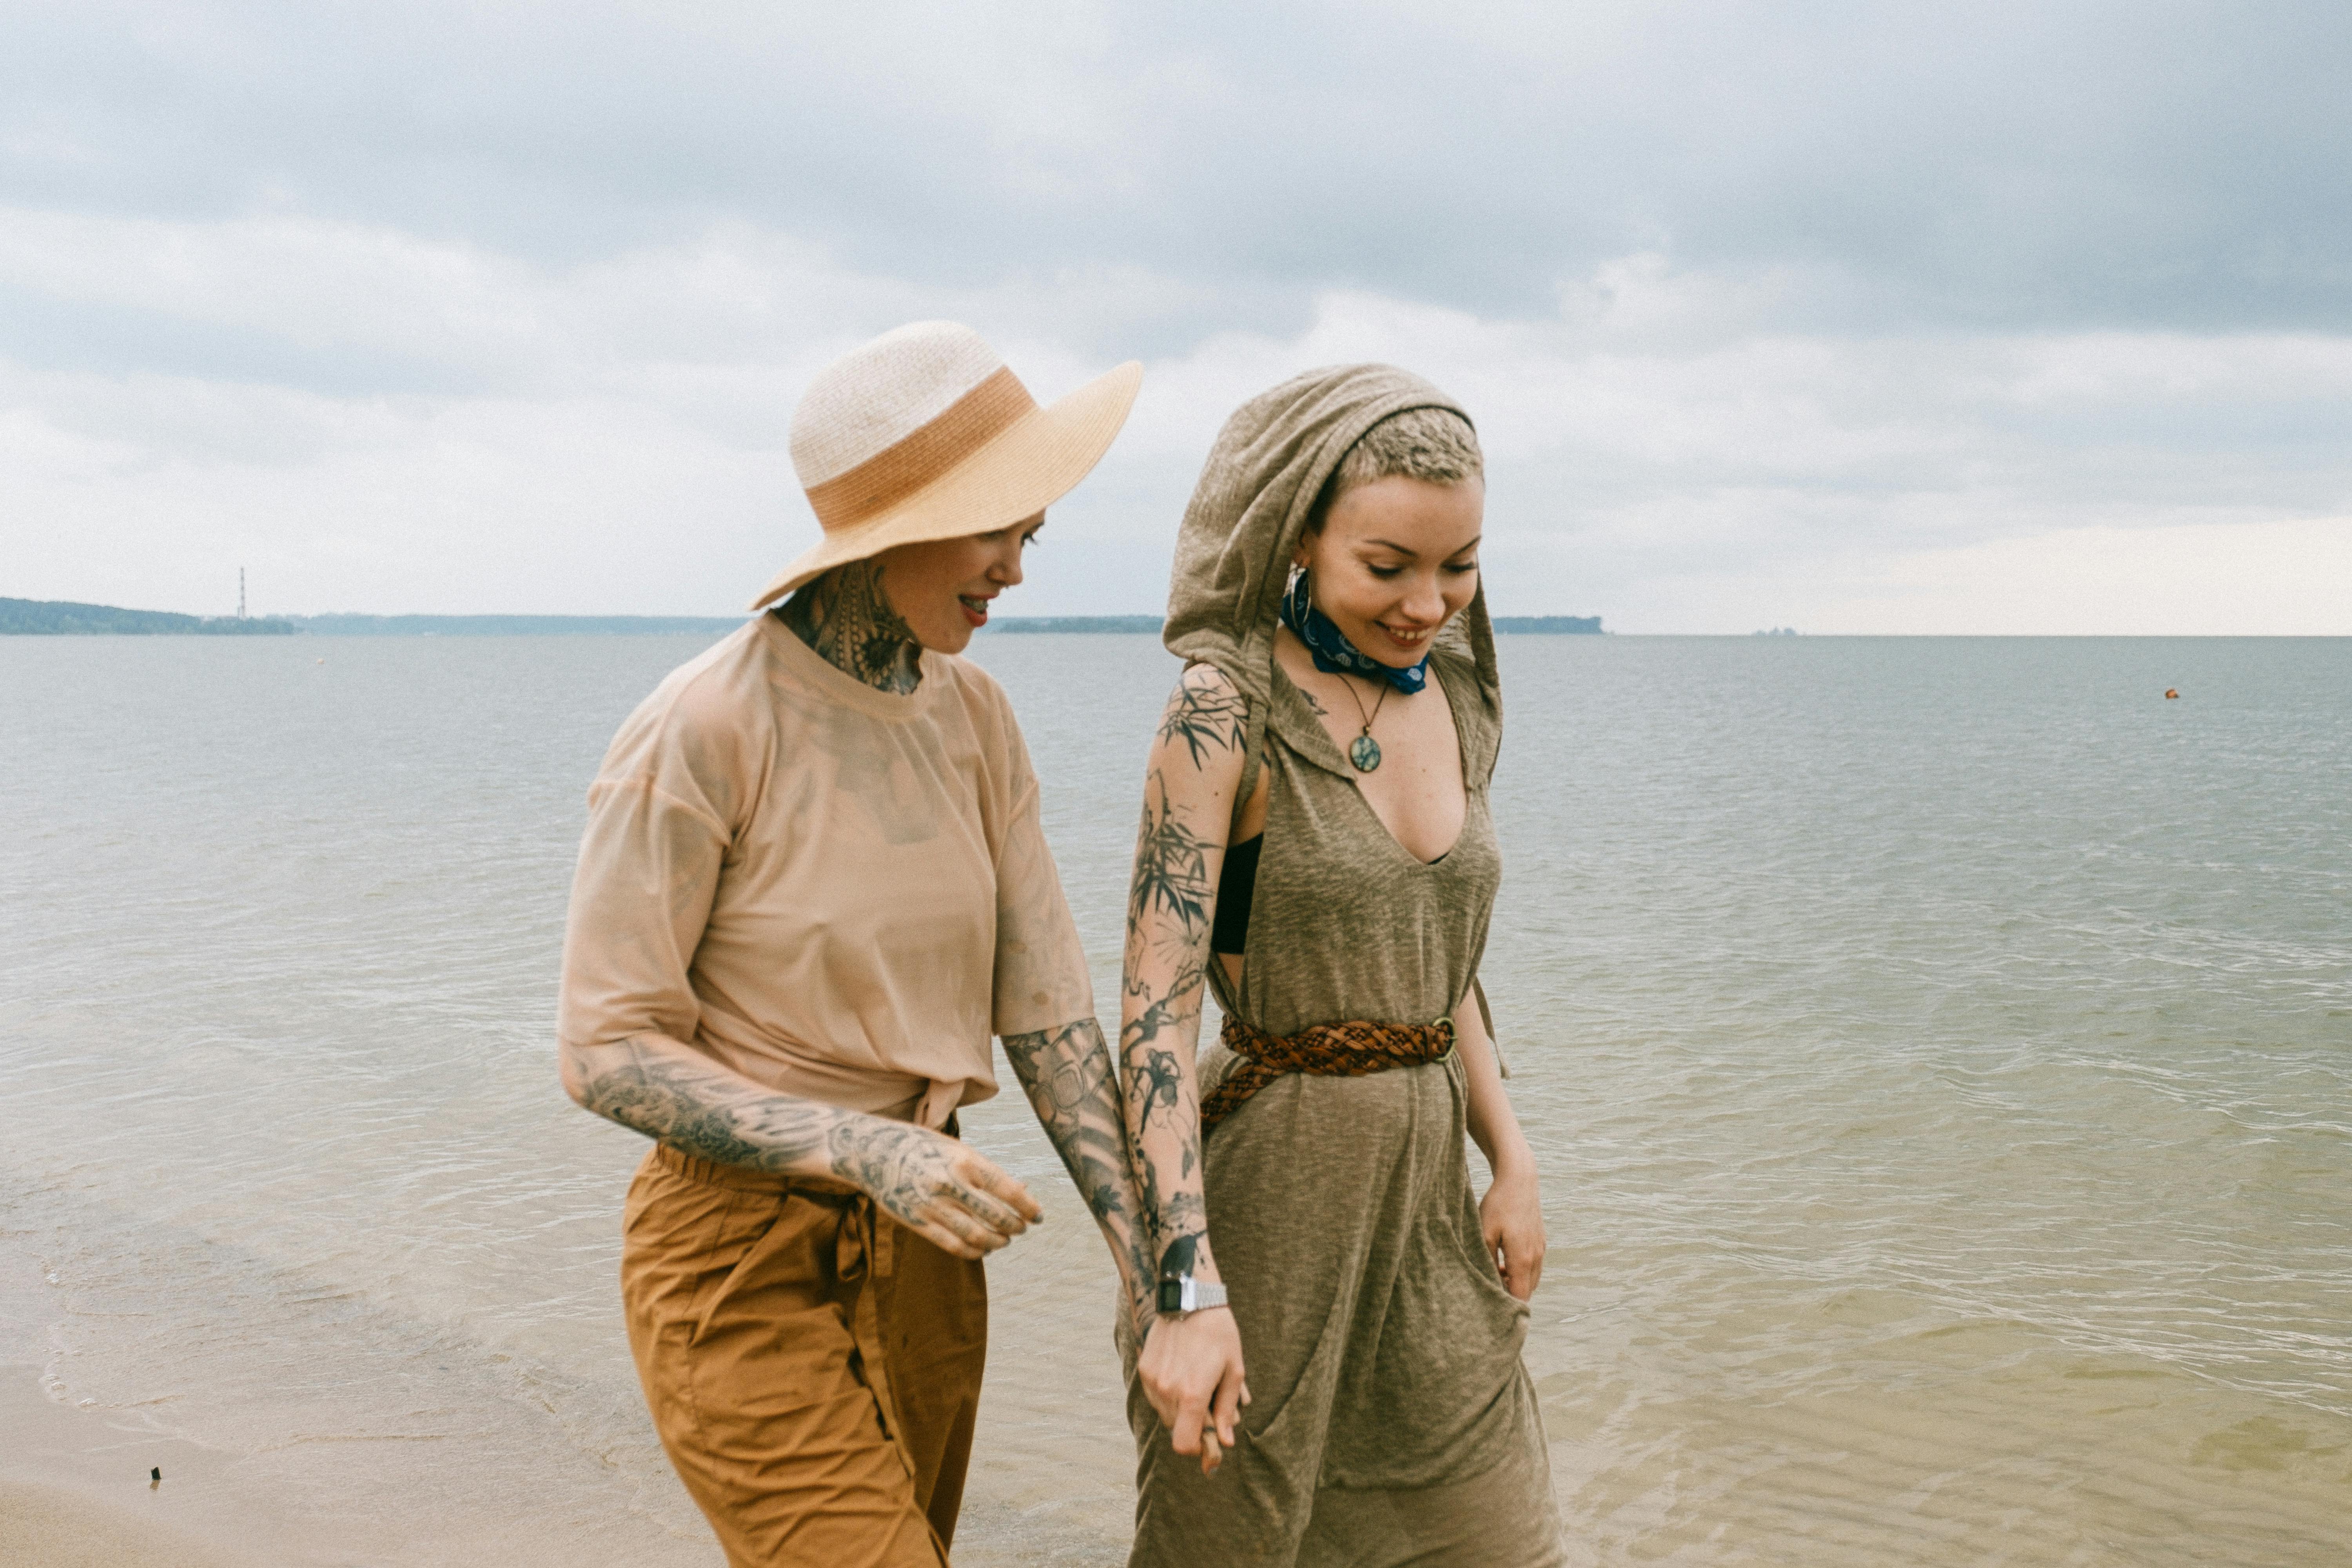 photo of women holding hands while walking on beach